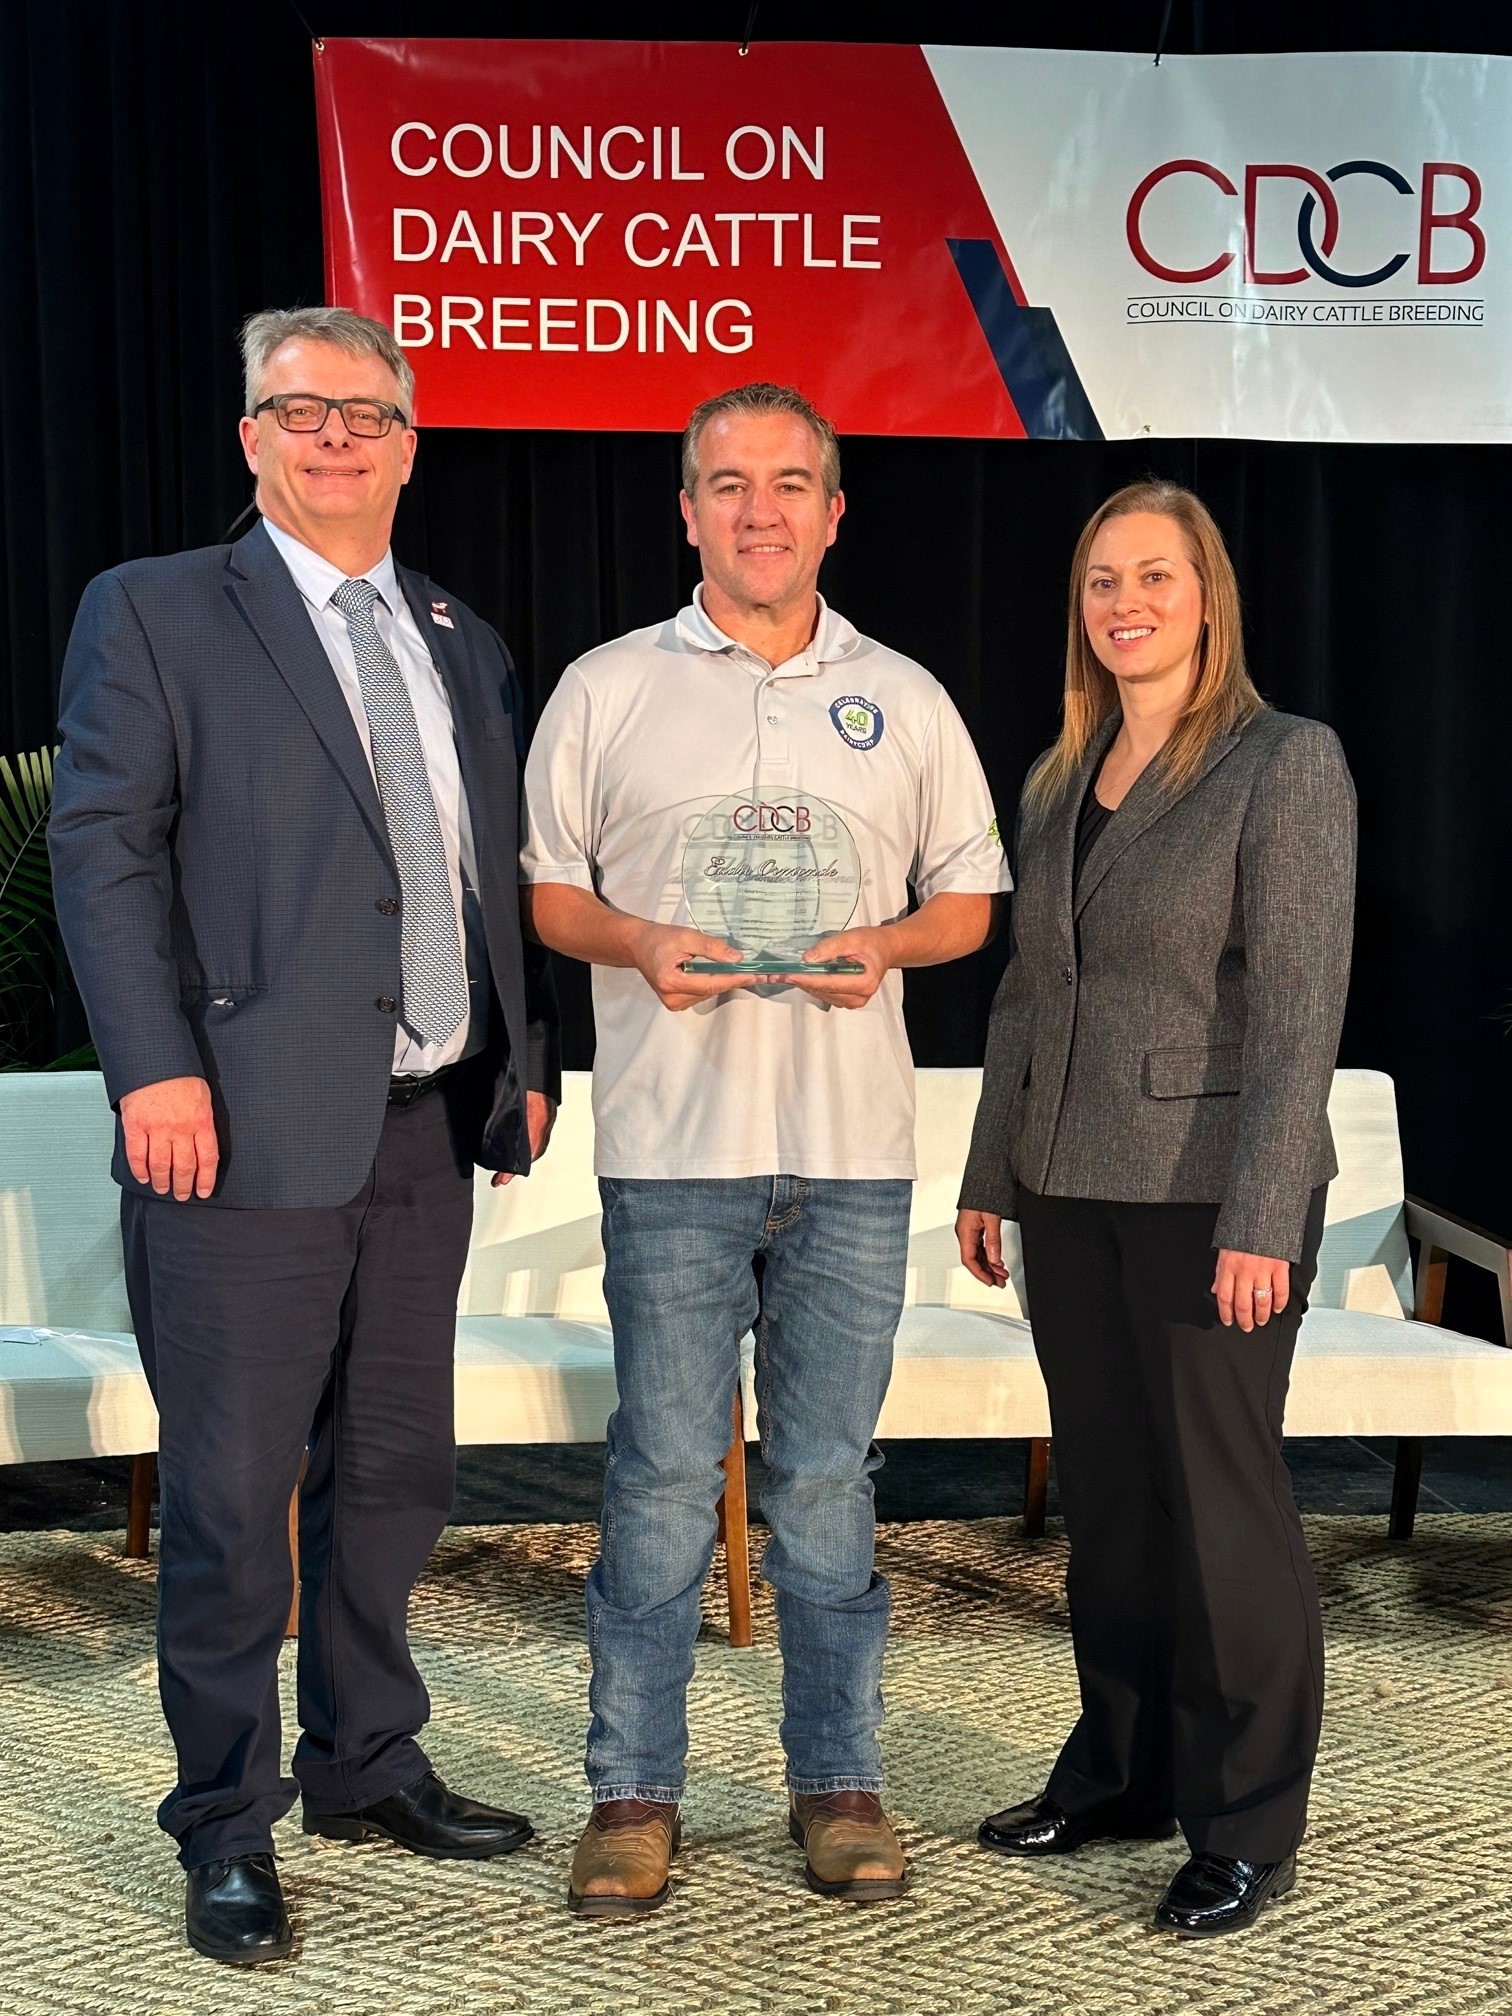 Eddie Ormonde of VAS (middle) was recognized by João Dürr and Lindsey Worden for his service on the CDCB Board of Directors.